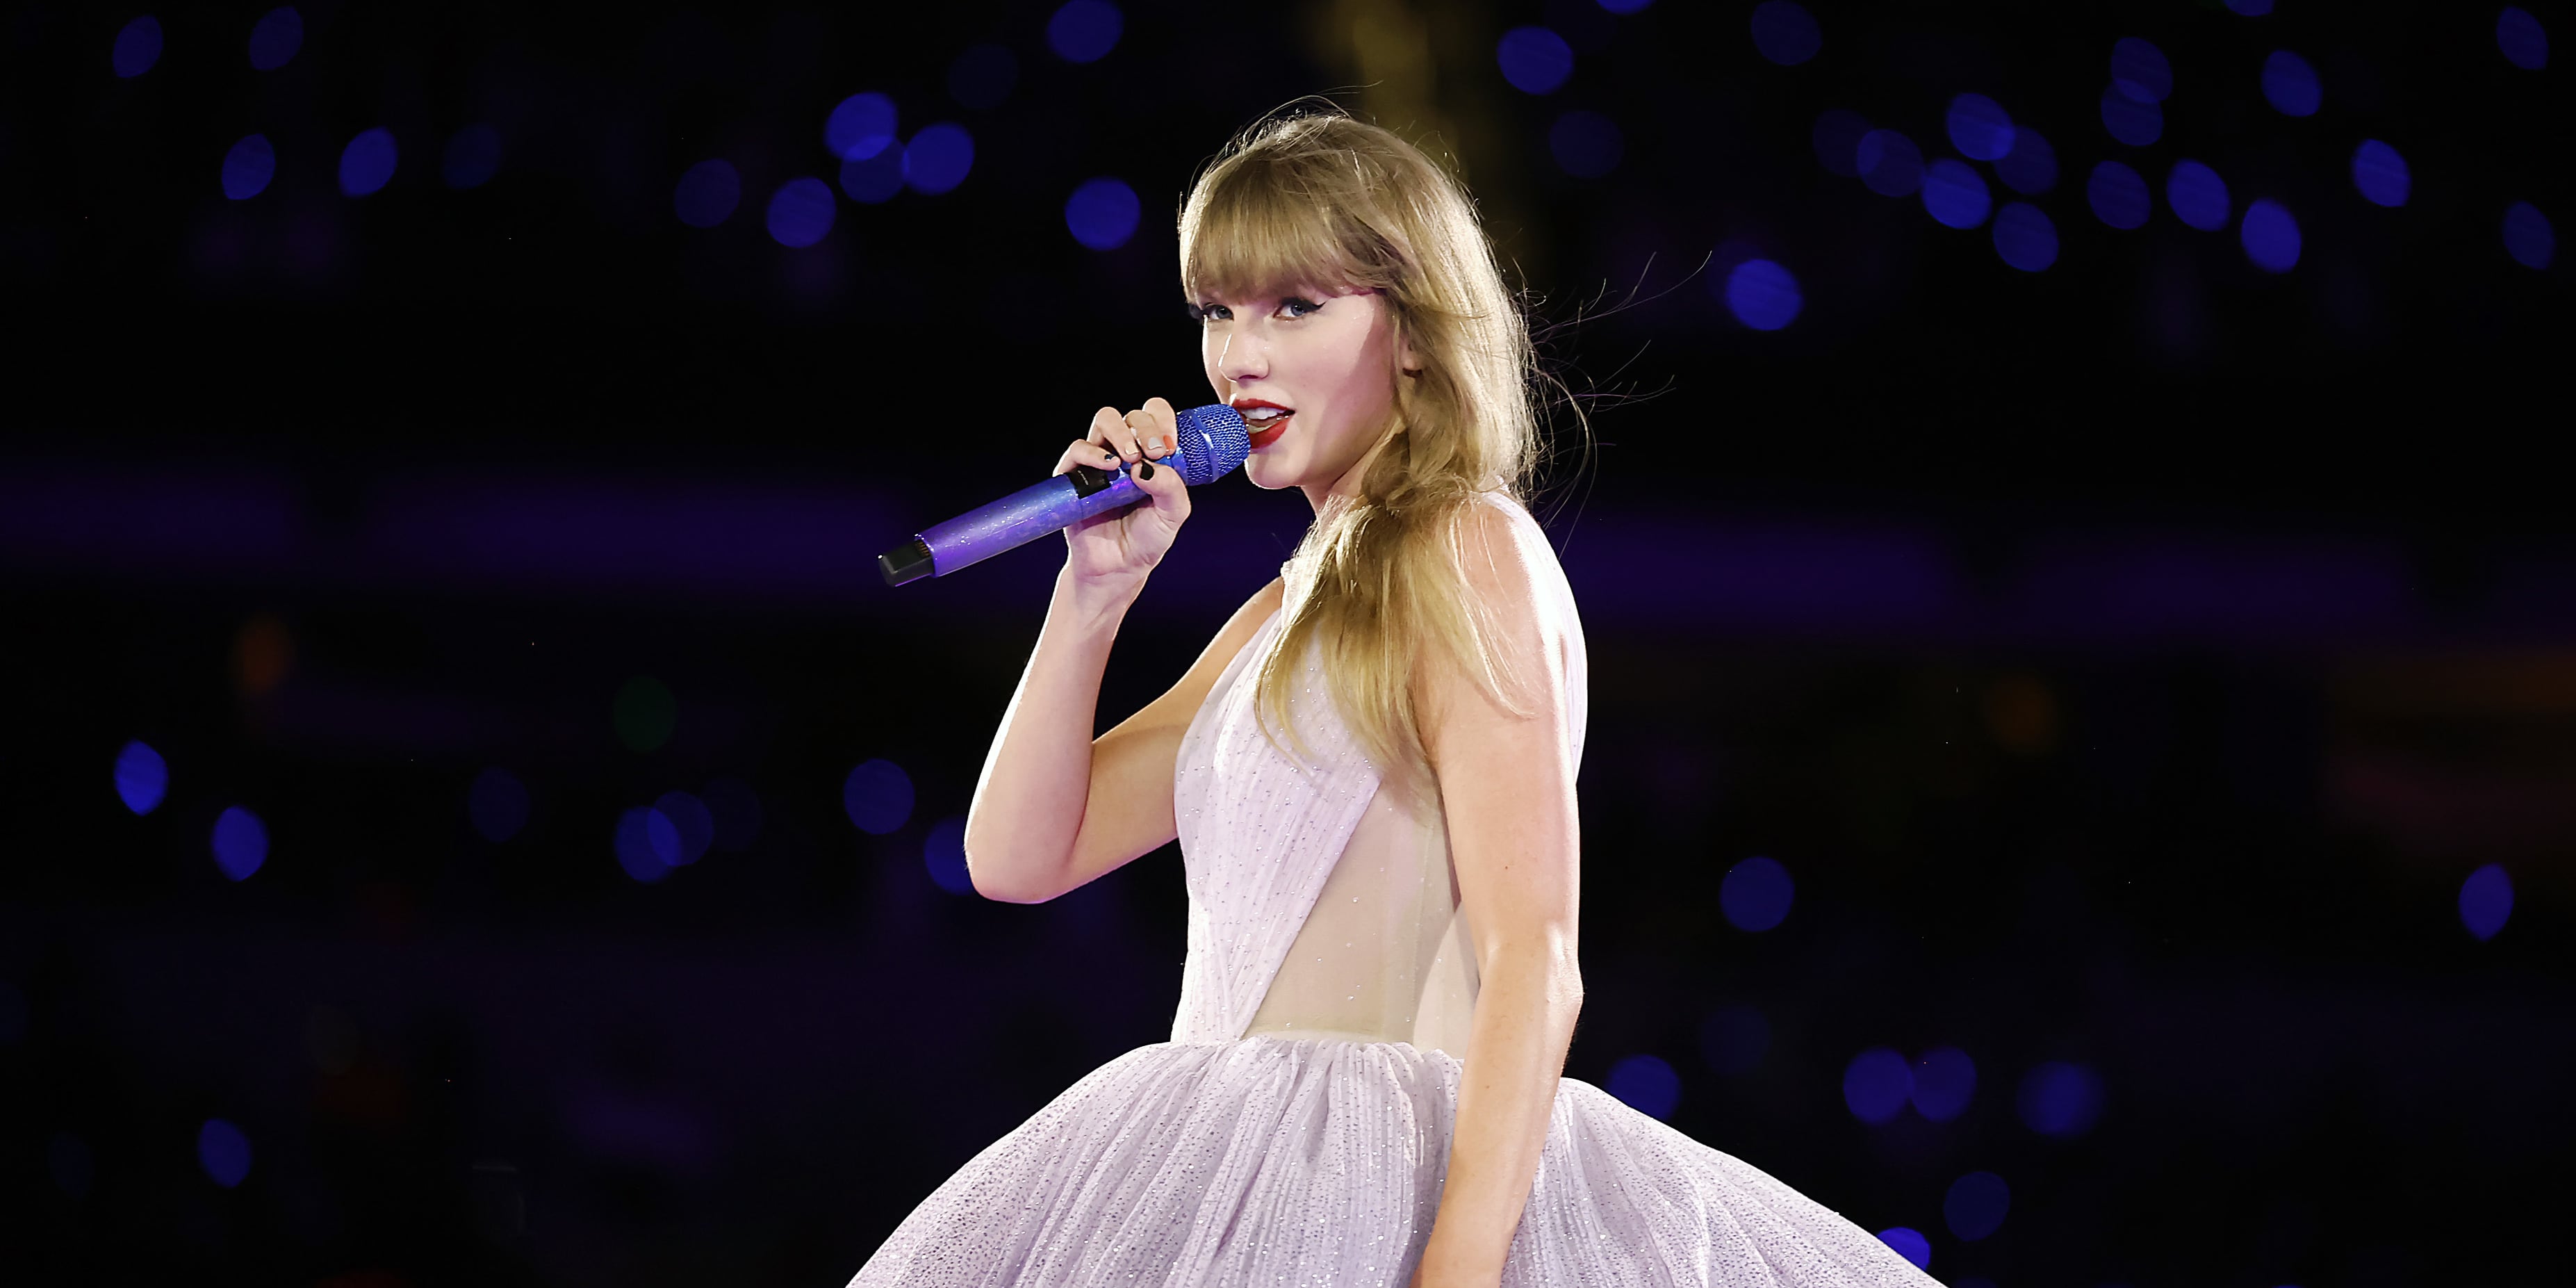 Who Are Taylor Swift's Songs About?